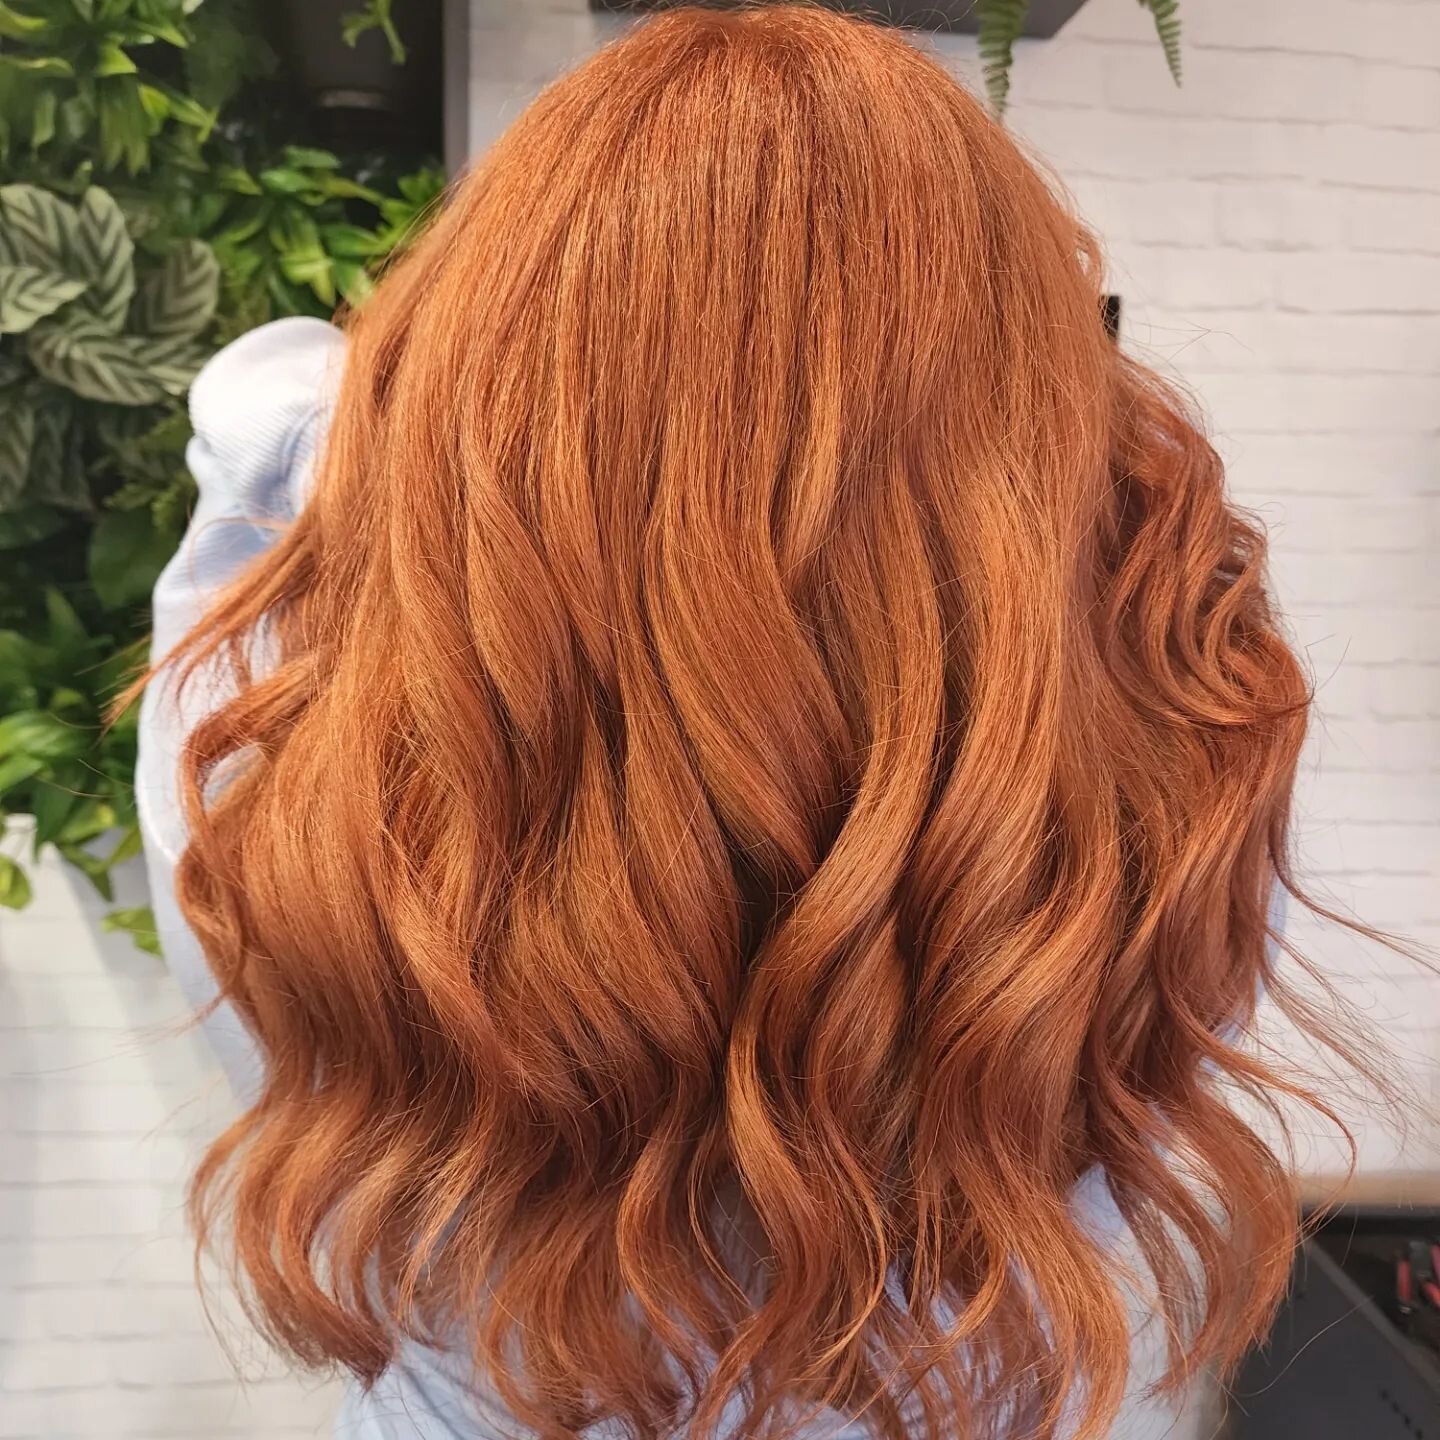 Why be Blonde when you can be Copper!

Did you know....Copper is one of the most flattering hair colours and can suit most skin tones.

Why not try a shade of copper on your hair at your next visit to Le Garage.

Before and After ➡️
Hair by Amanda

#